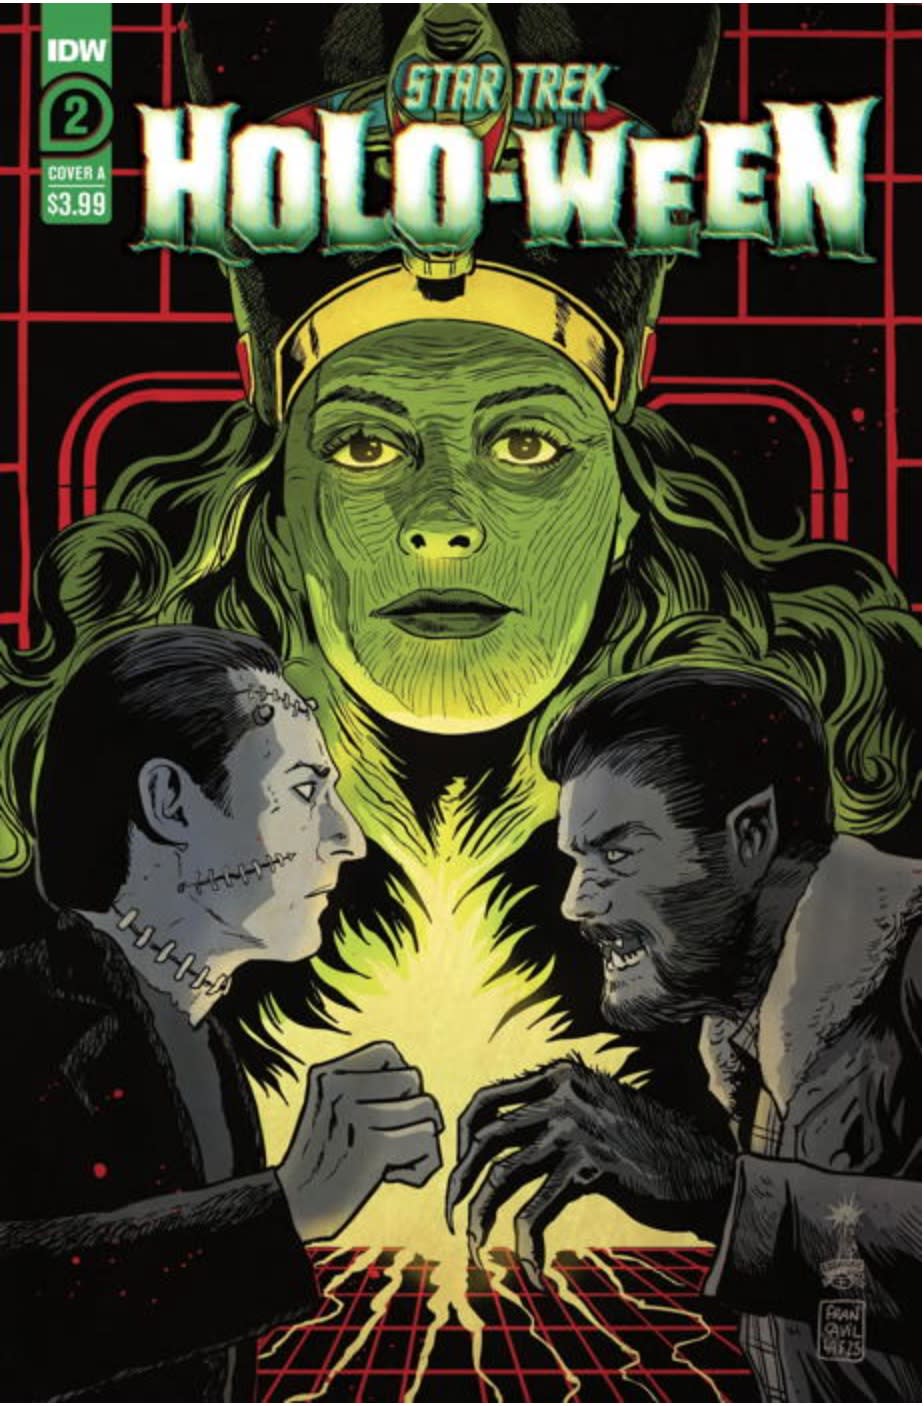 illustration showing a frankenstein-like monster and werewolf-like creature, with a woman's face in the background.